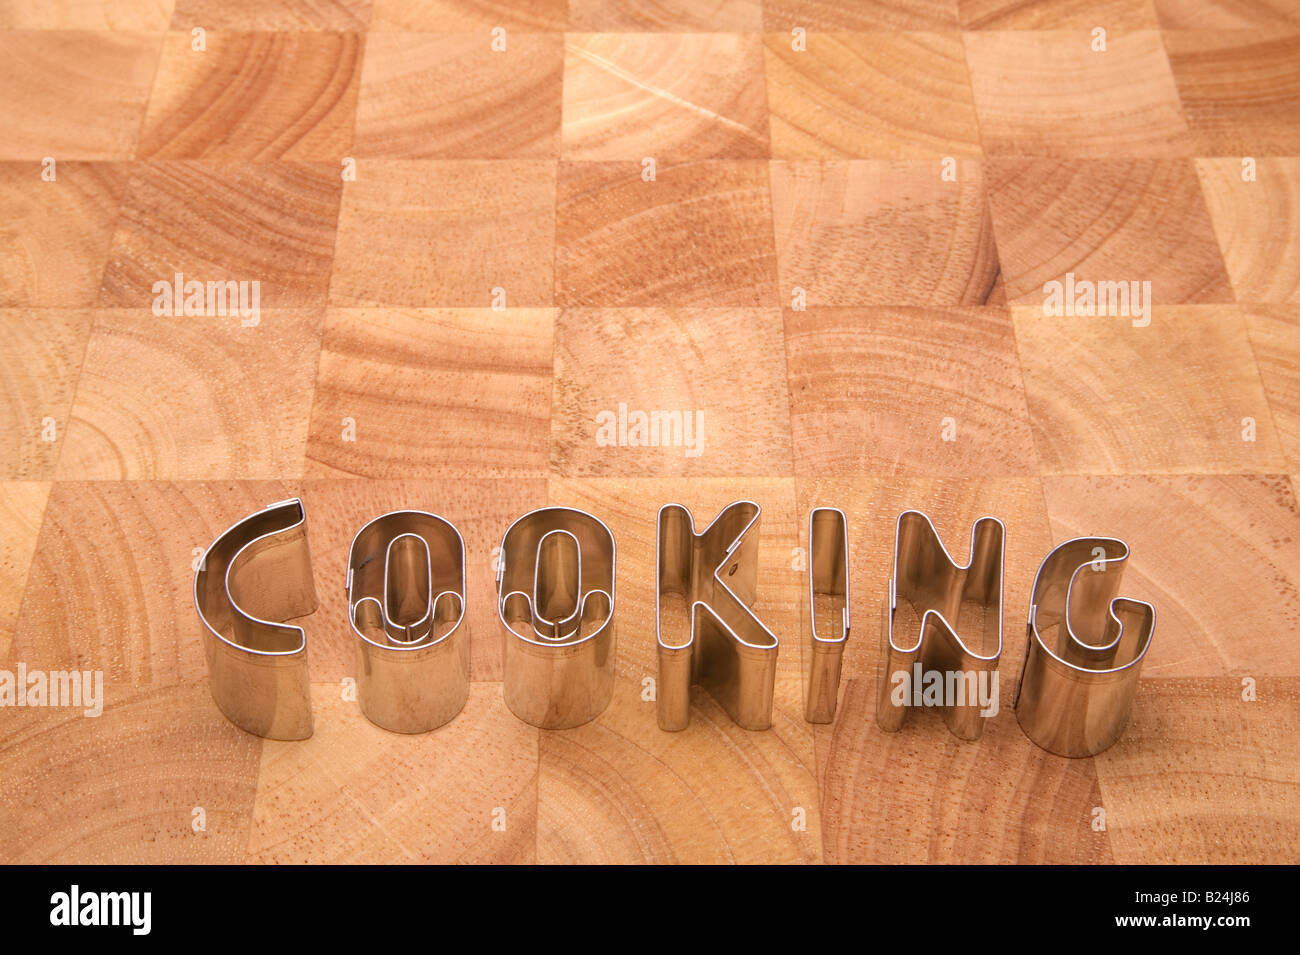 Cooking spelt using metal letters on a wooden block chopping board Stock Photo